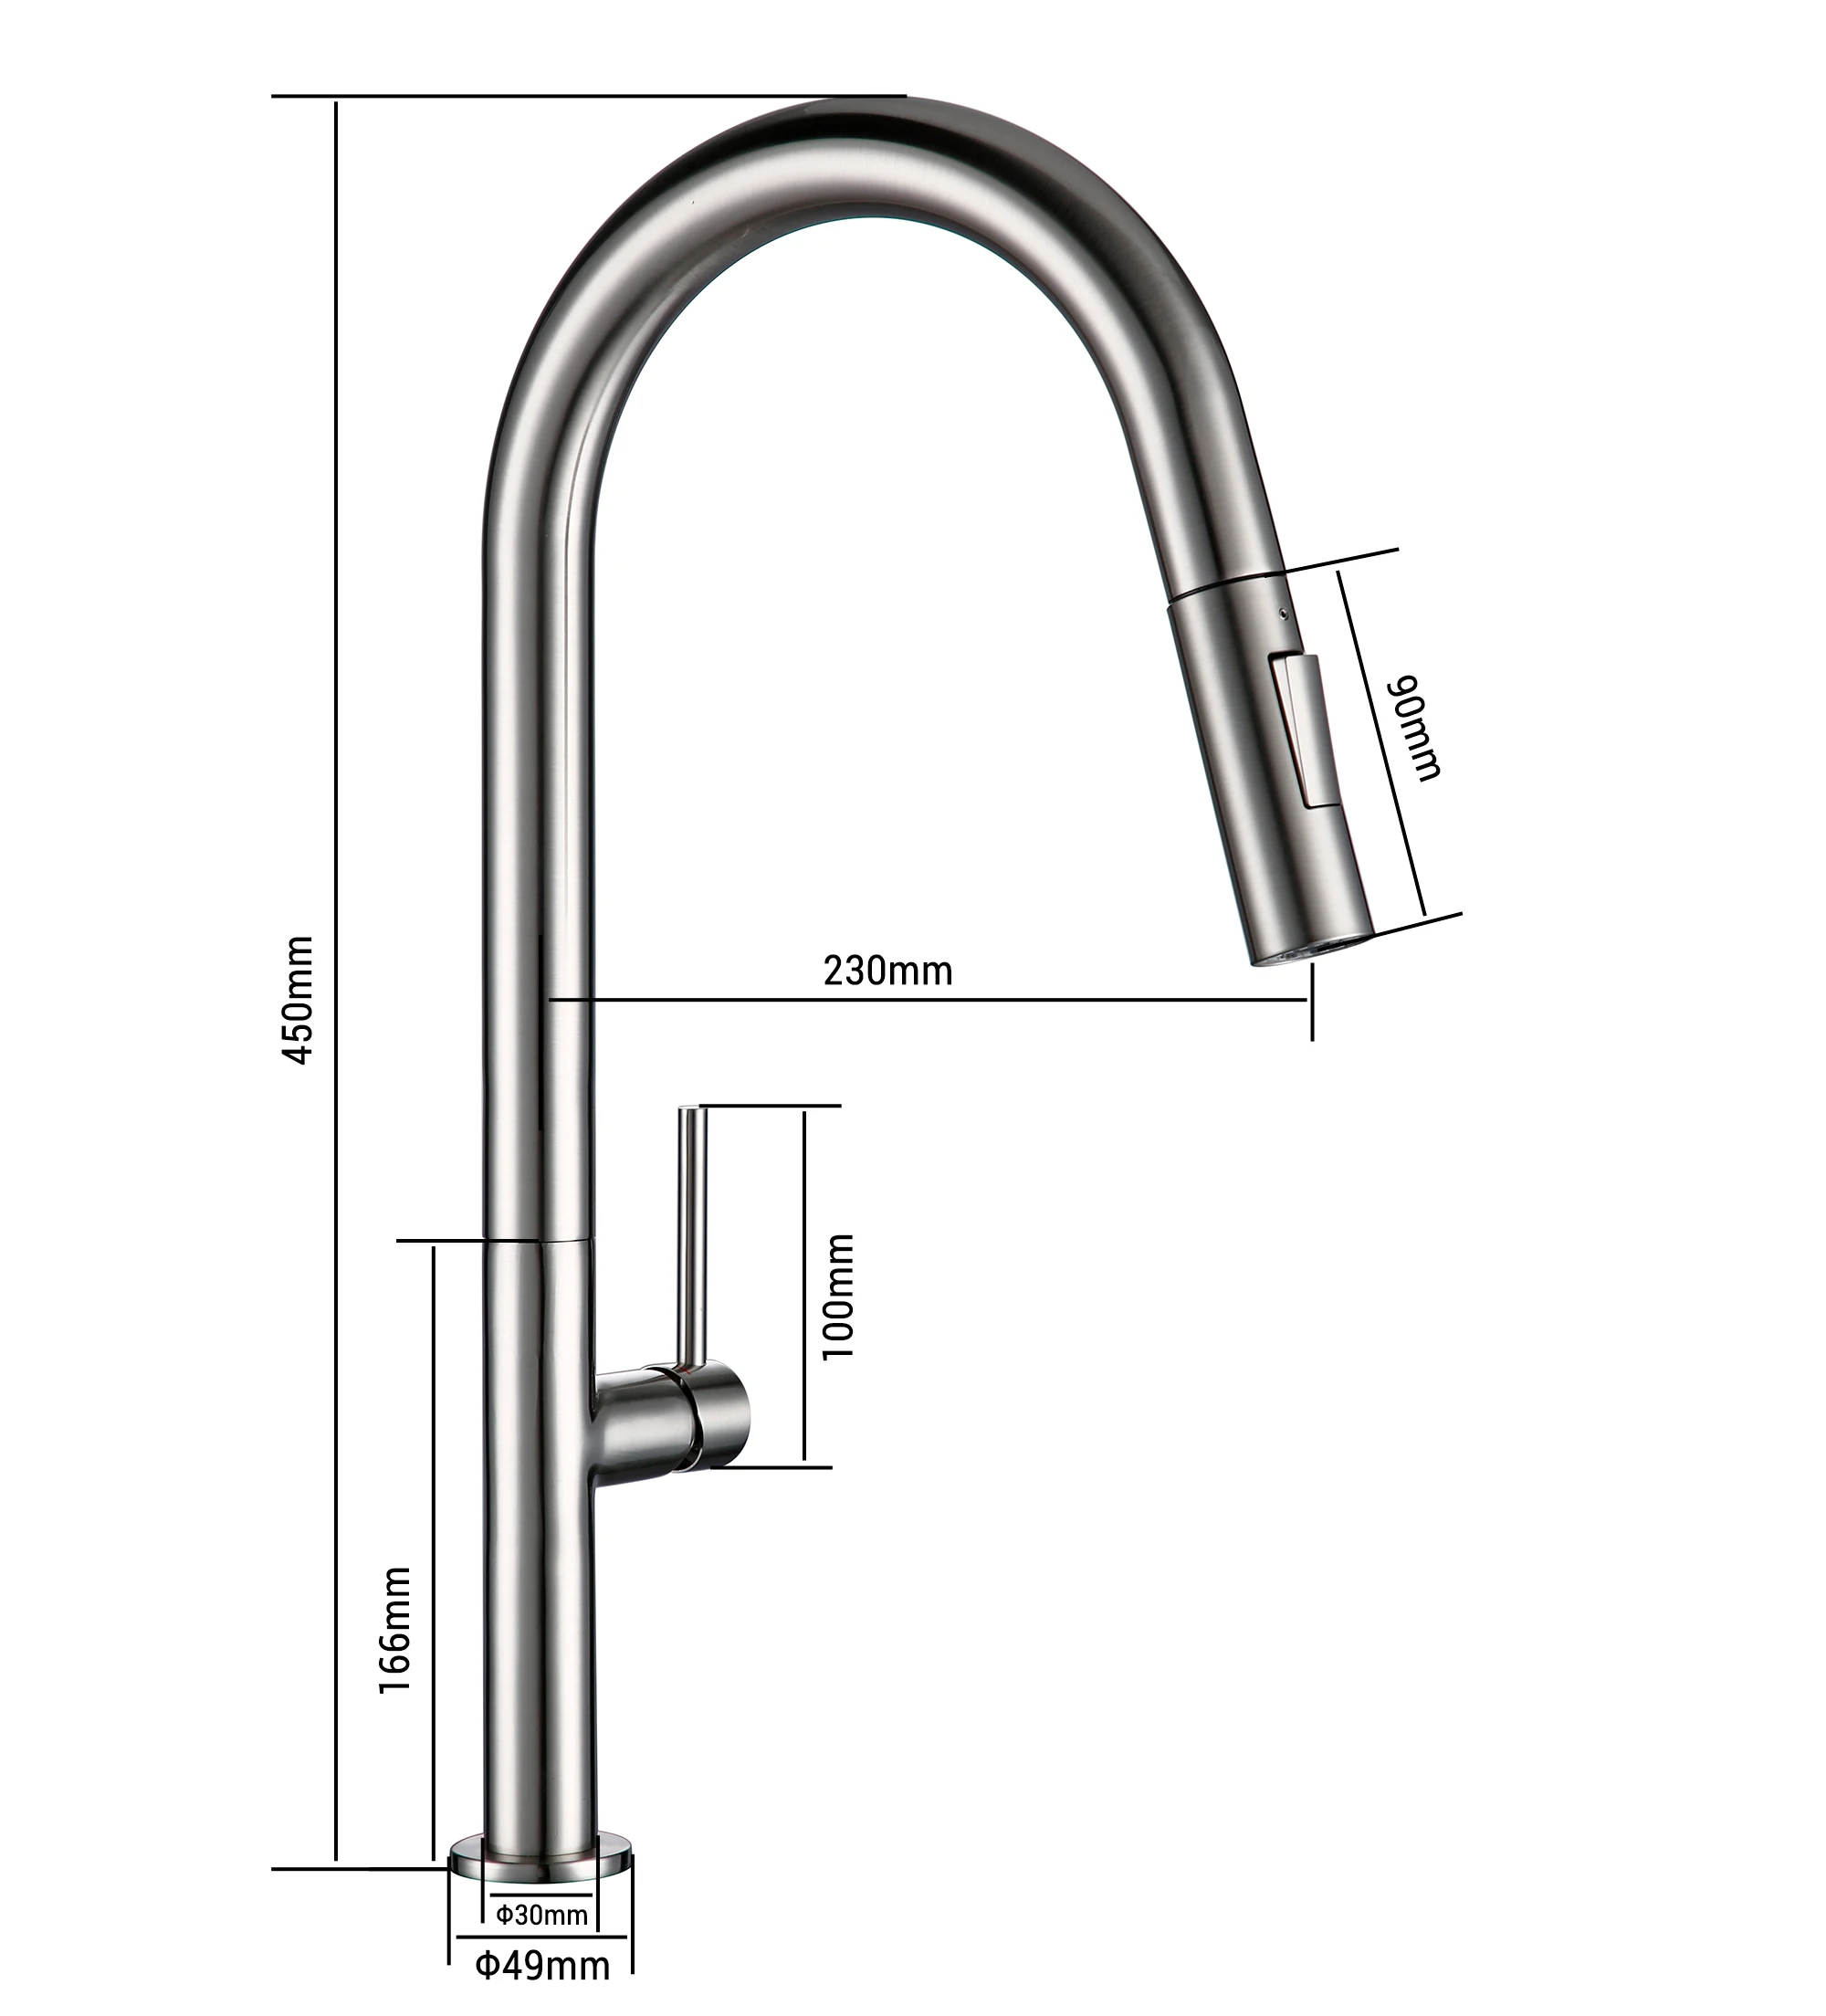 Brass Pull Out Kitchen Faucet Brushed Chrome and Black 360 degree rotation kitchen Hot and cold water Sink taps Kitchen Faucet